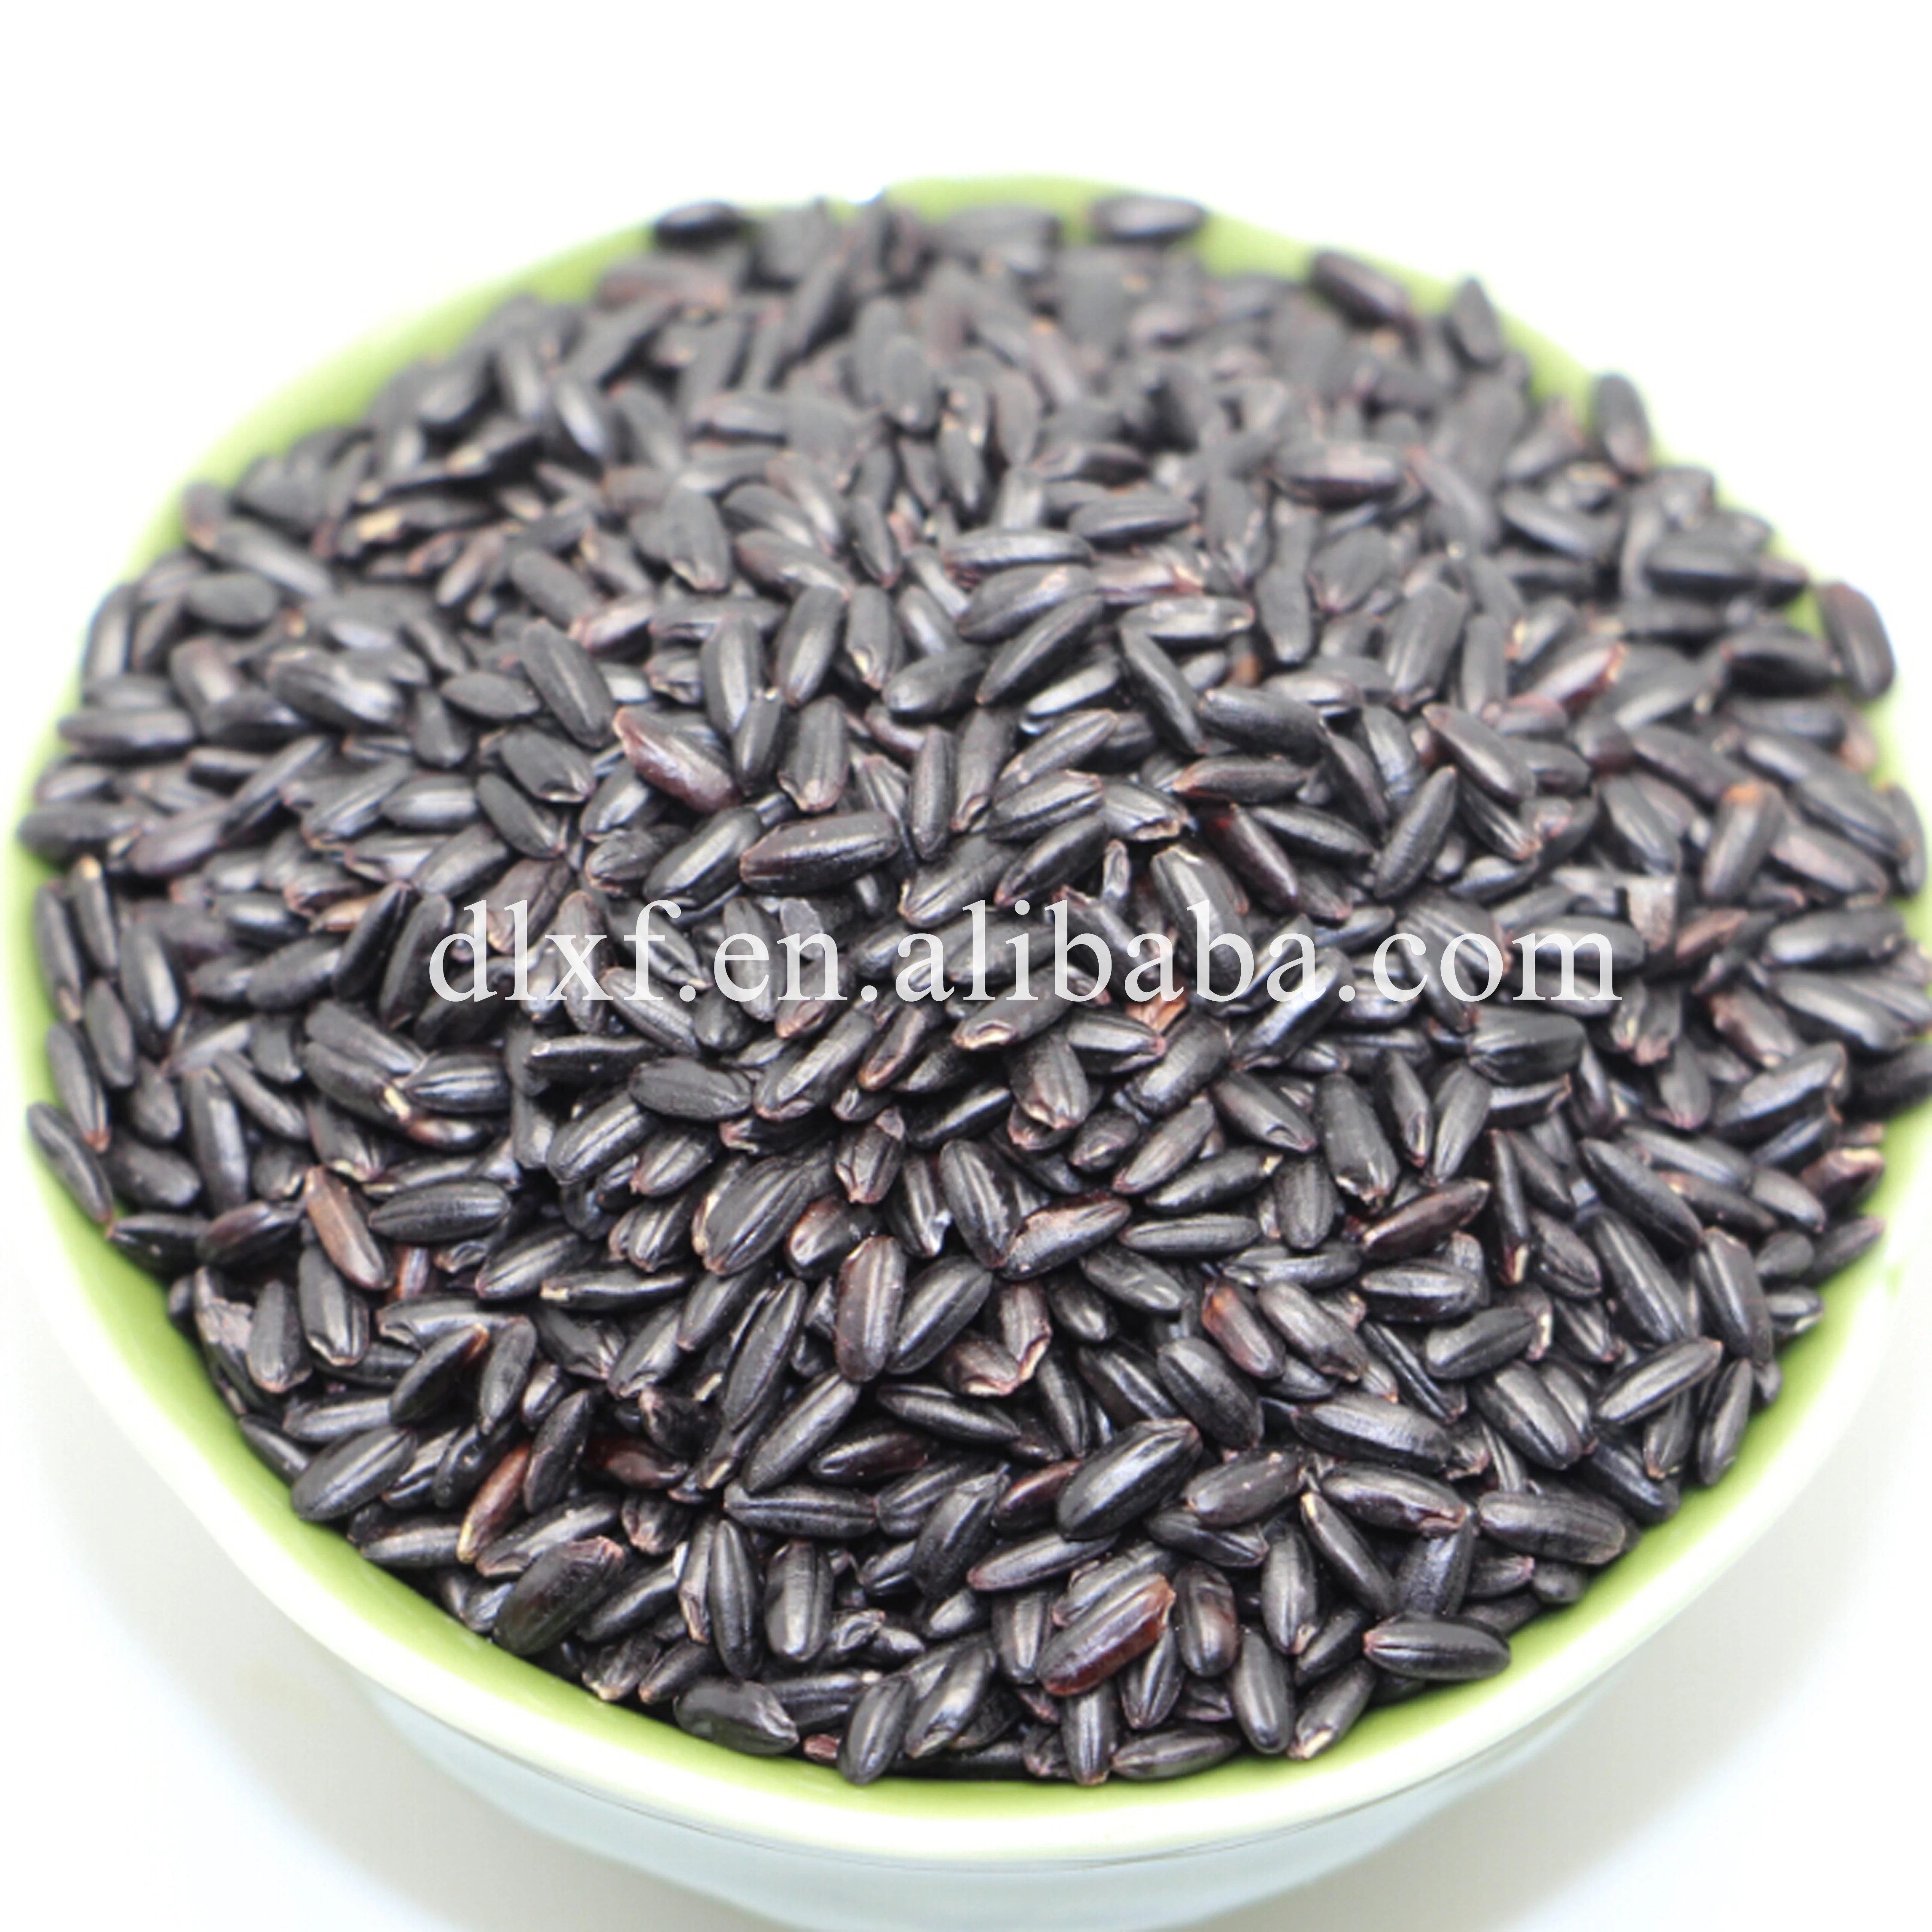 
hot sale china parboiled rice black rice steamed rice for sale  (60345521738)